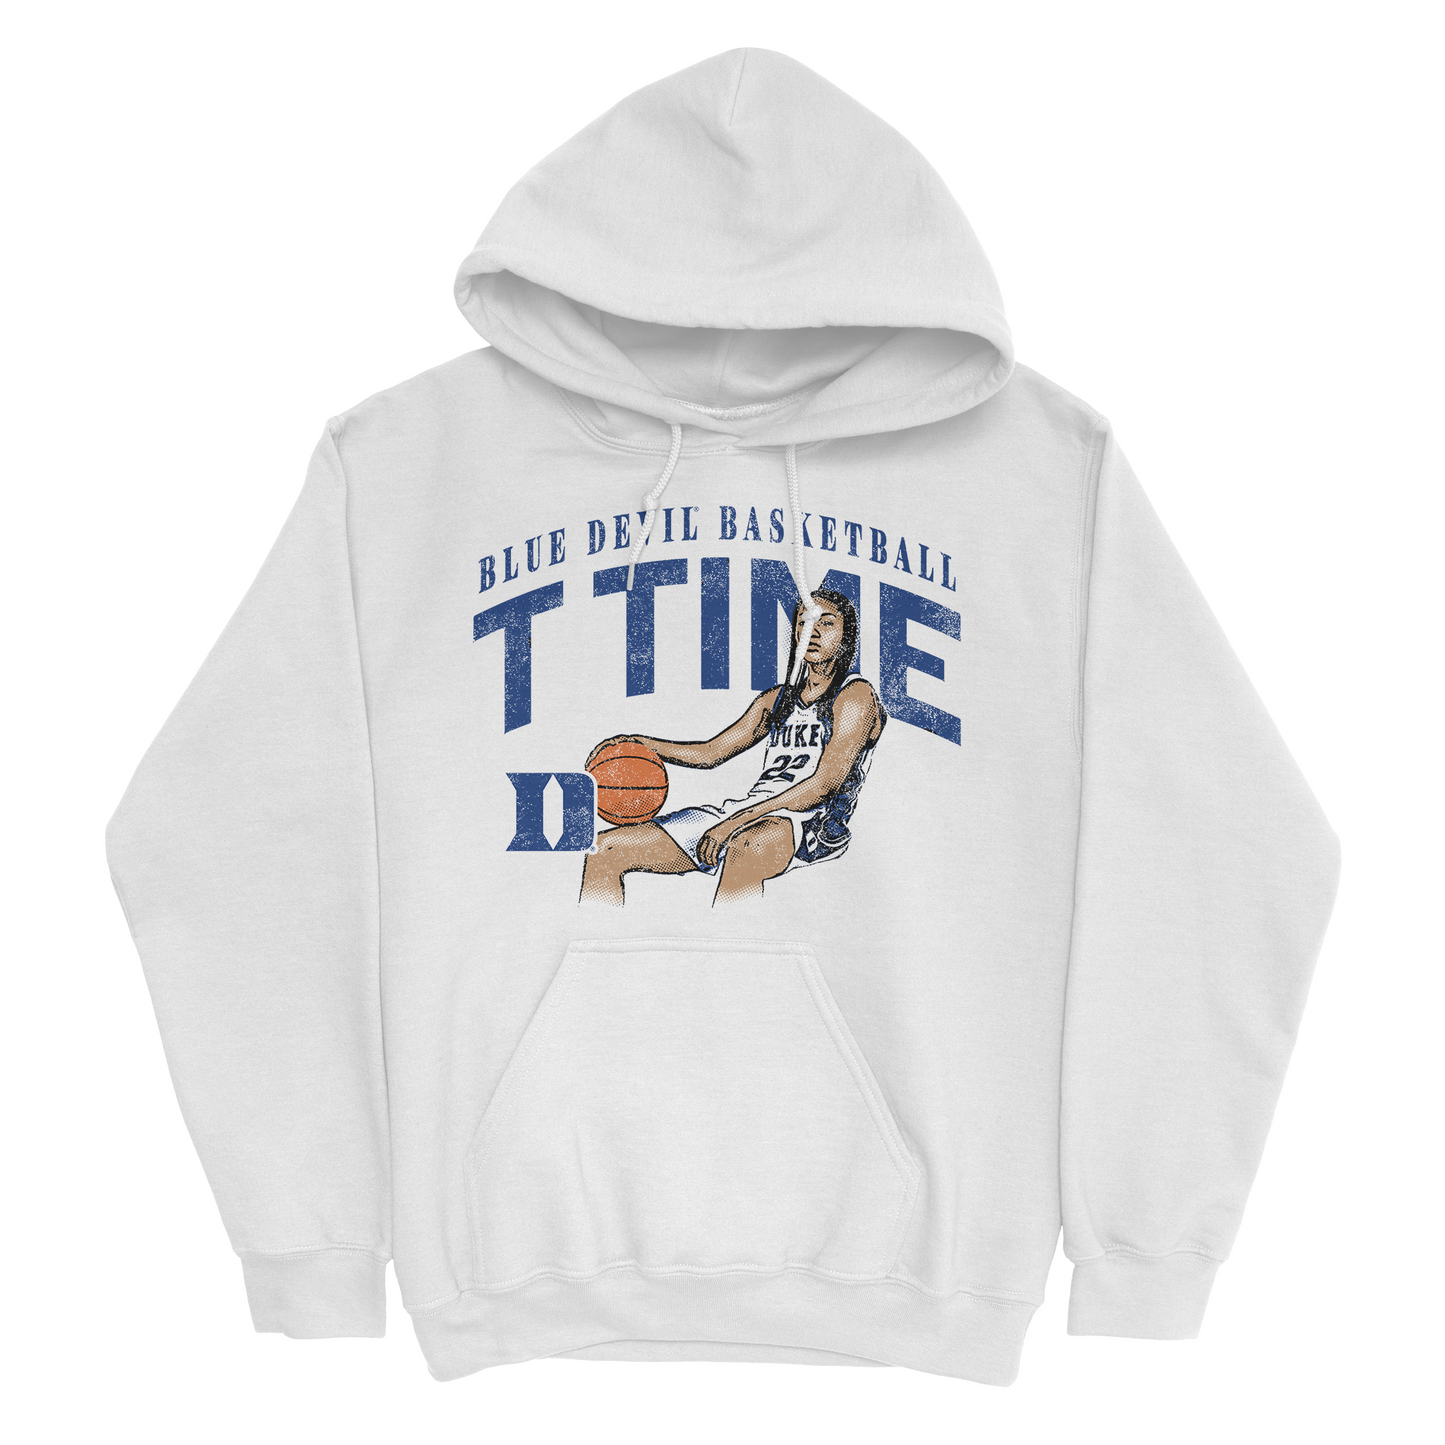 EXCLUSIVE RELEASE: T Time White Cartoon Hoodie